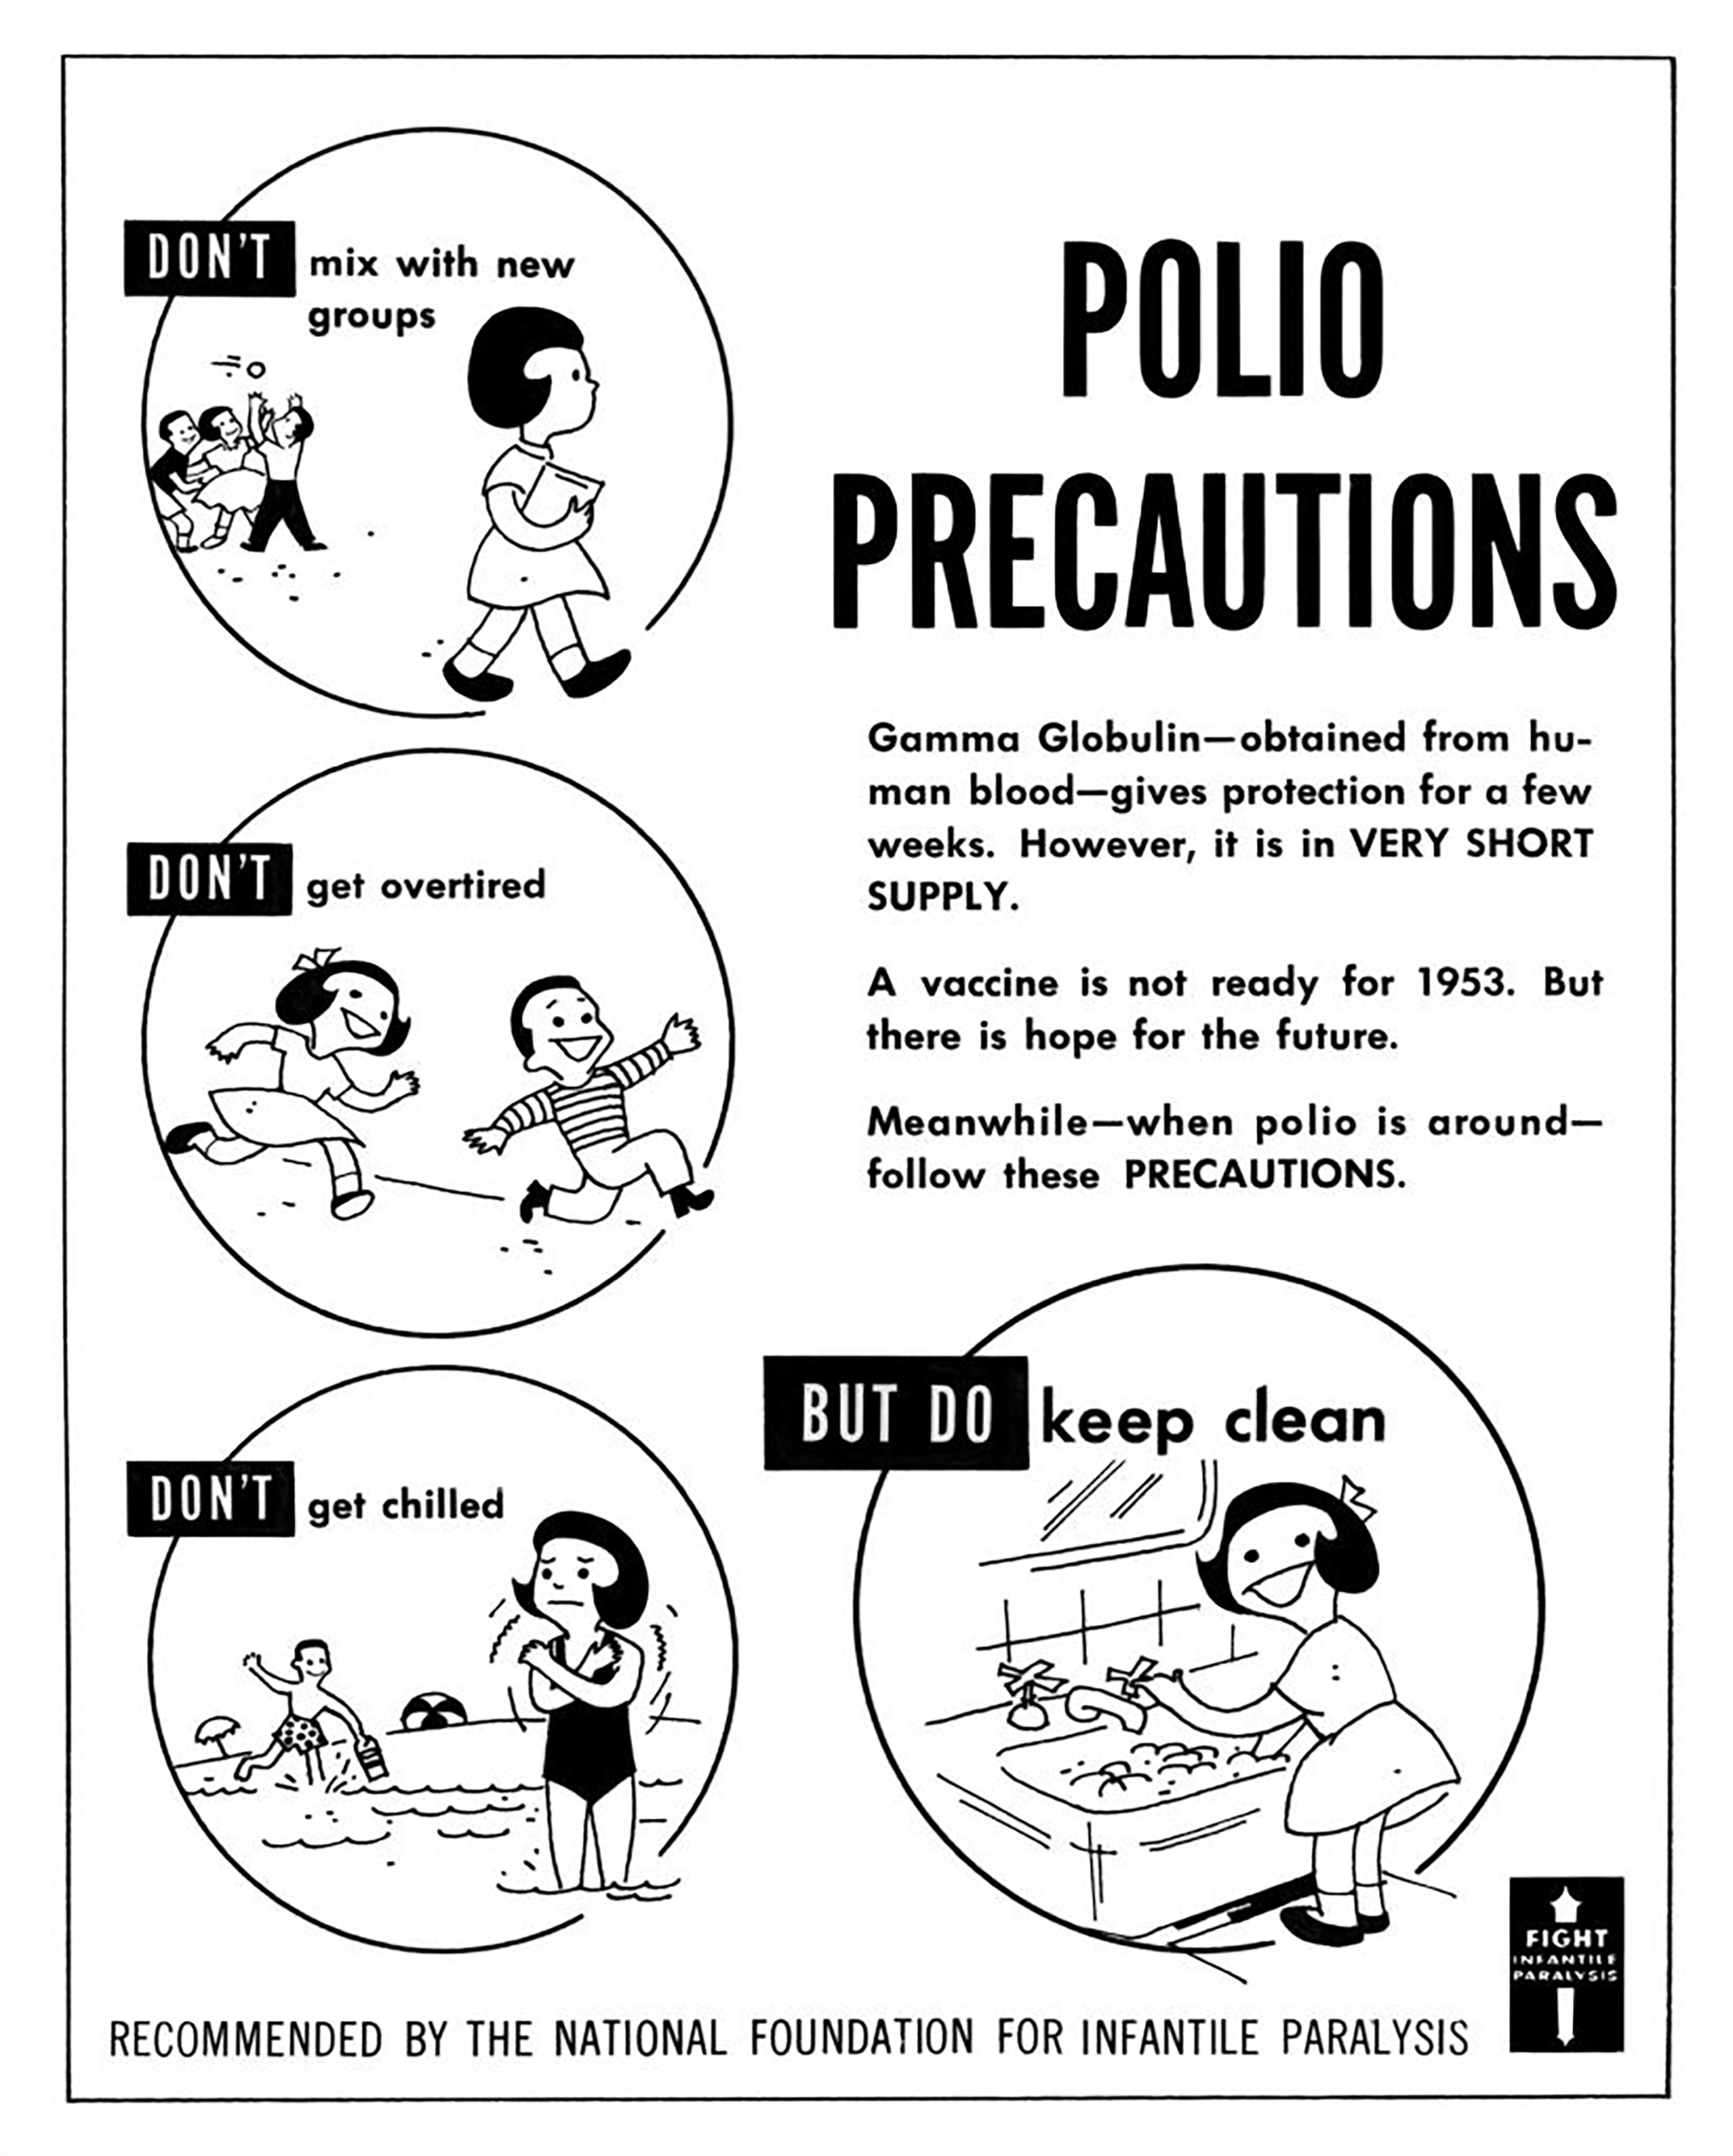 Polio Poster Cartoon developed by the National Foundation for Infantile Paralysis (early name for March of Dimes) in 1953